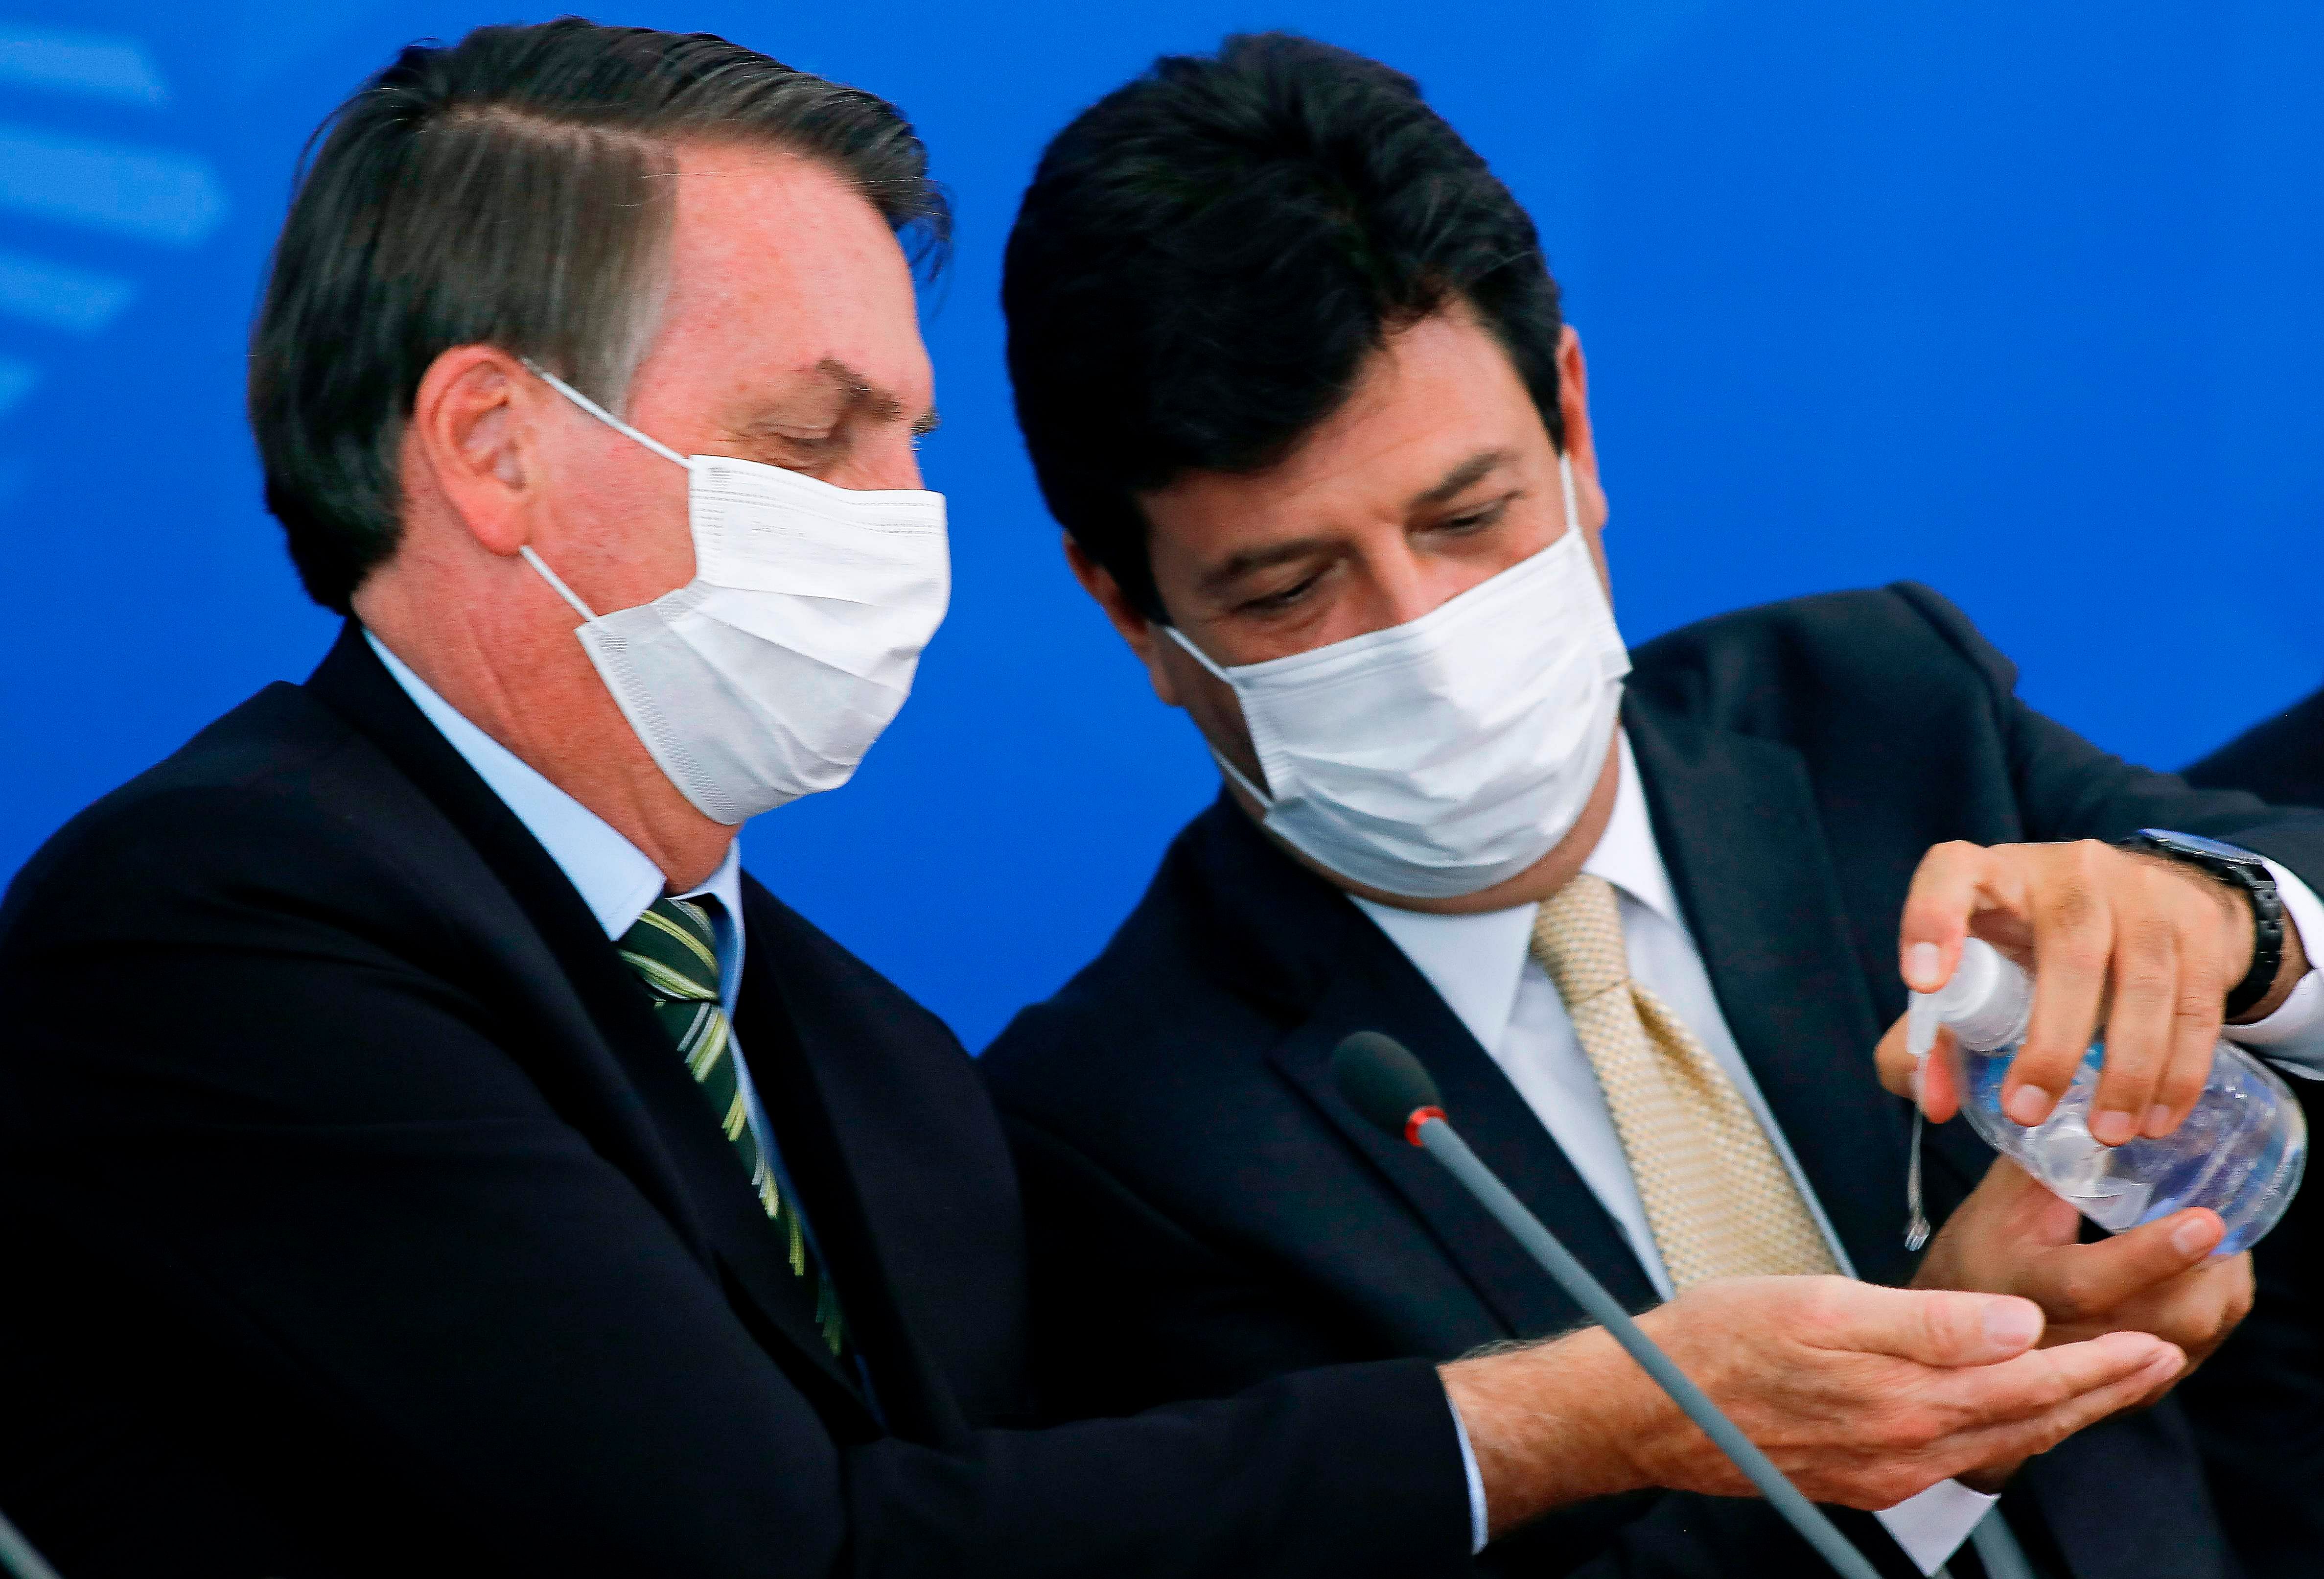 Brazilian President Jair Bolsonaro (L) and former Health Minister Luiz Henrique Mandetta sanitize their hands wearing face masks during a press conference related to the new coronavirus. (AFP file photo)